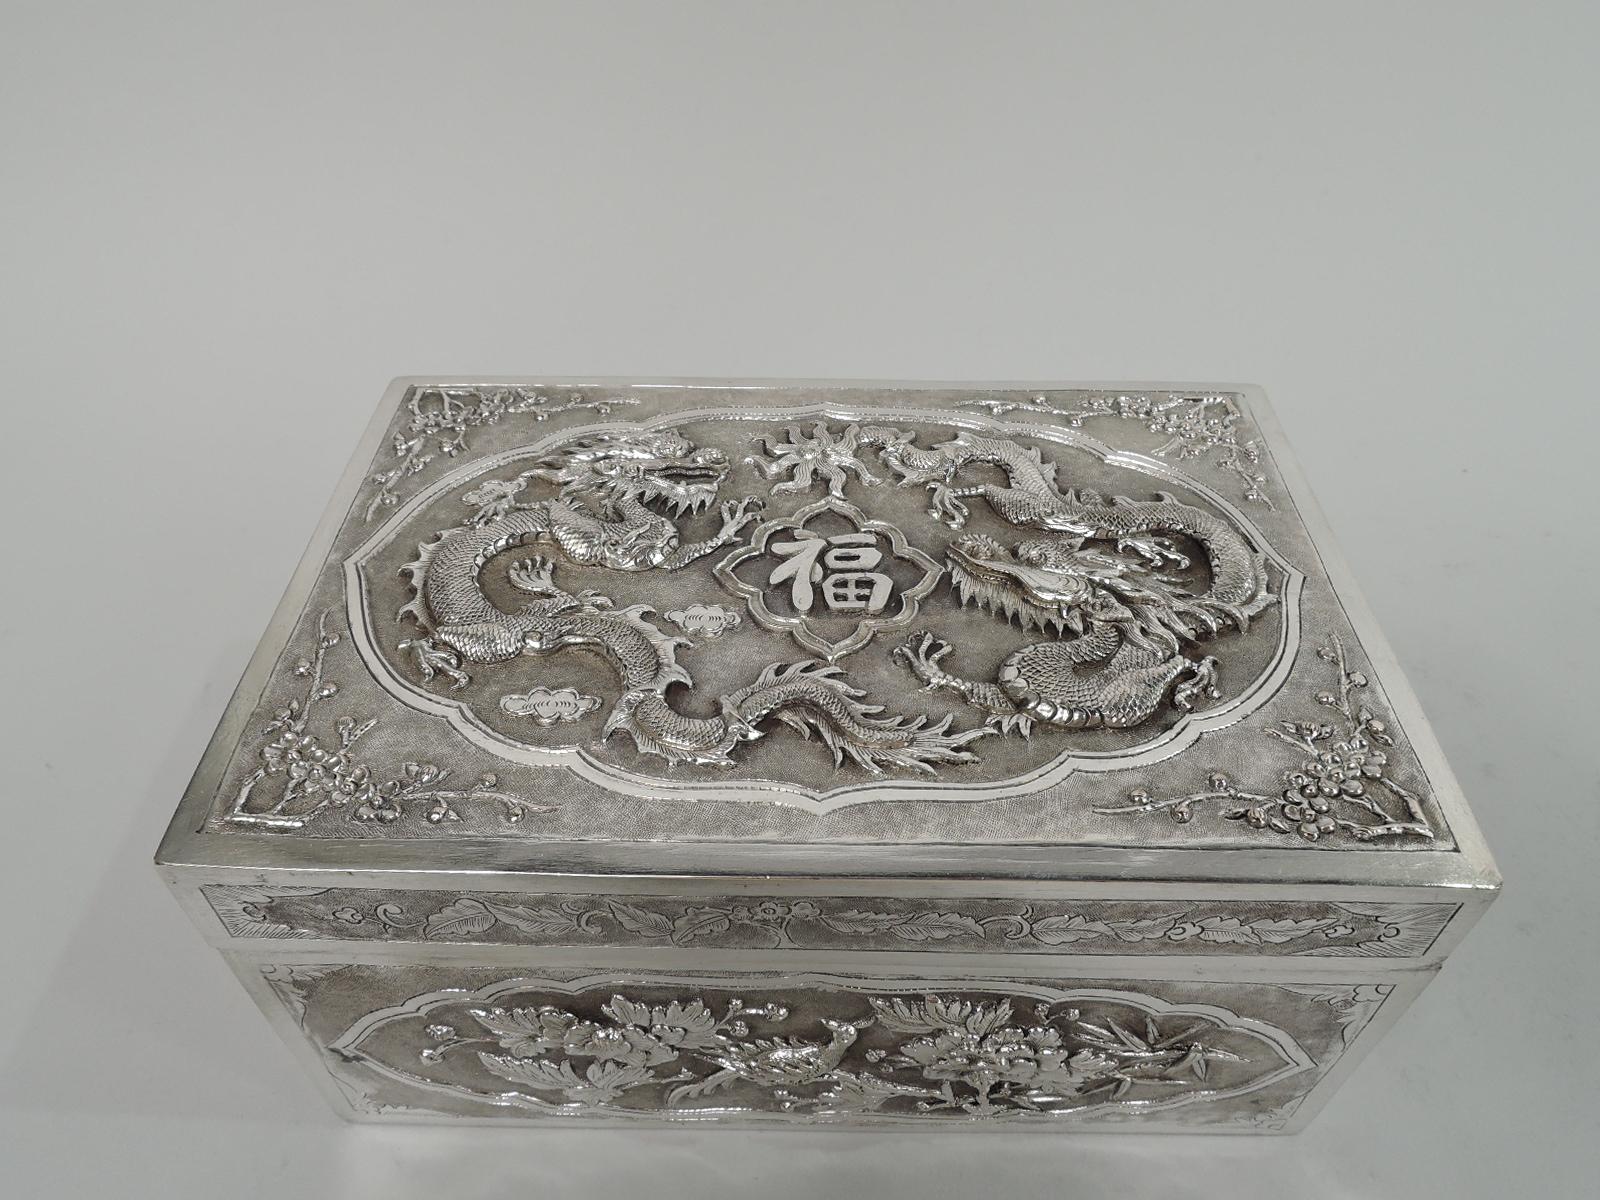 Vietnamese silver box, late 19th century. Rectangular with straight sides. Cover flat and hinged. Box sides have embossed blossoming branches, bamboo, and bird; engraved leaves and flowers at corners. Cover top has embossed slithering, scaly dragons